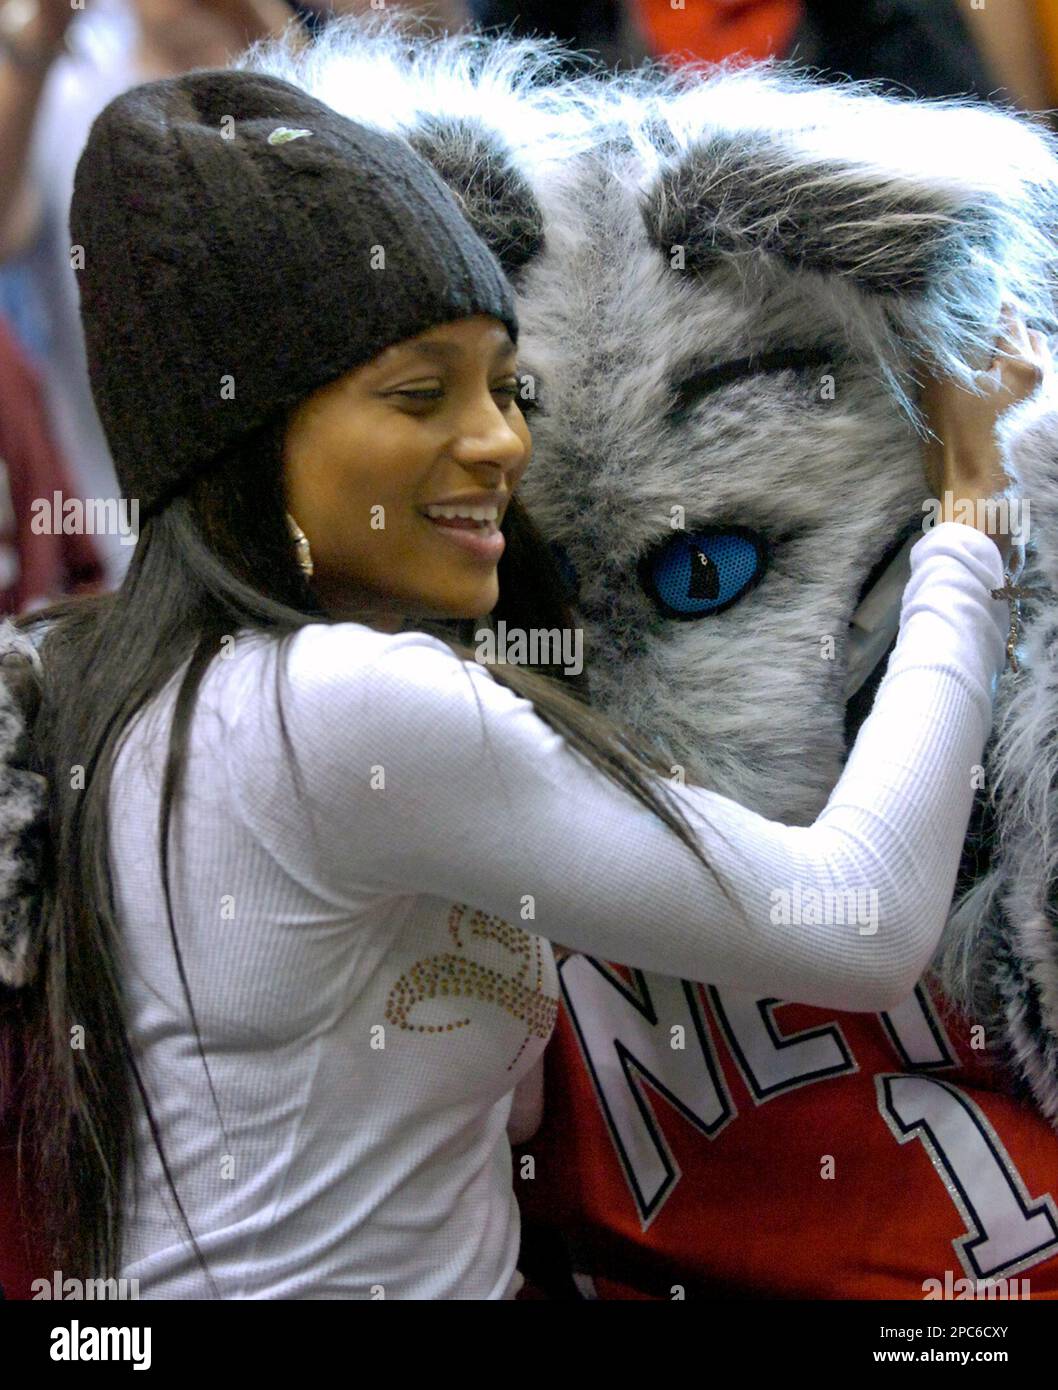 Singer Ciara hugs Sly, the Nets mascot, during NBA basketball Wednesday  night, Dec. 20, 2006 in East Rutherford, N.J. The New Jersey Nets beat the  Cleveland Cavaliers, 113-111. (AP Photo/Bill Kostroun Stock